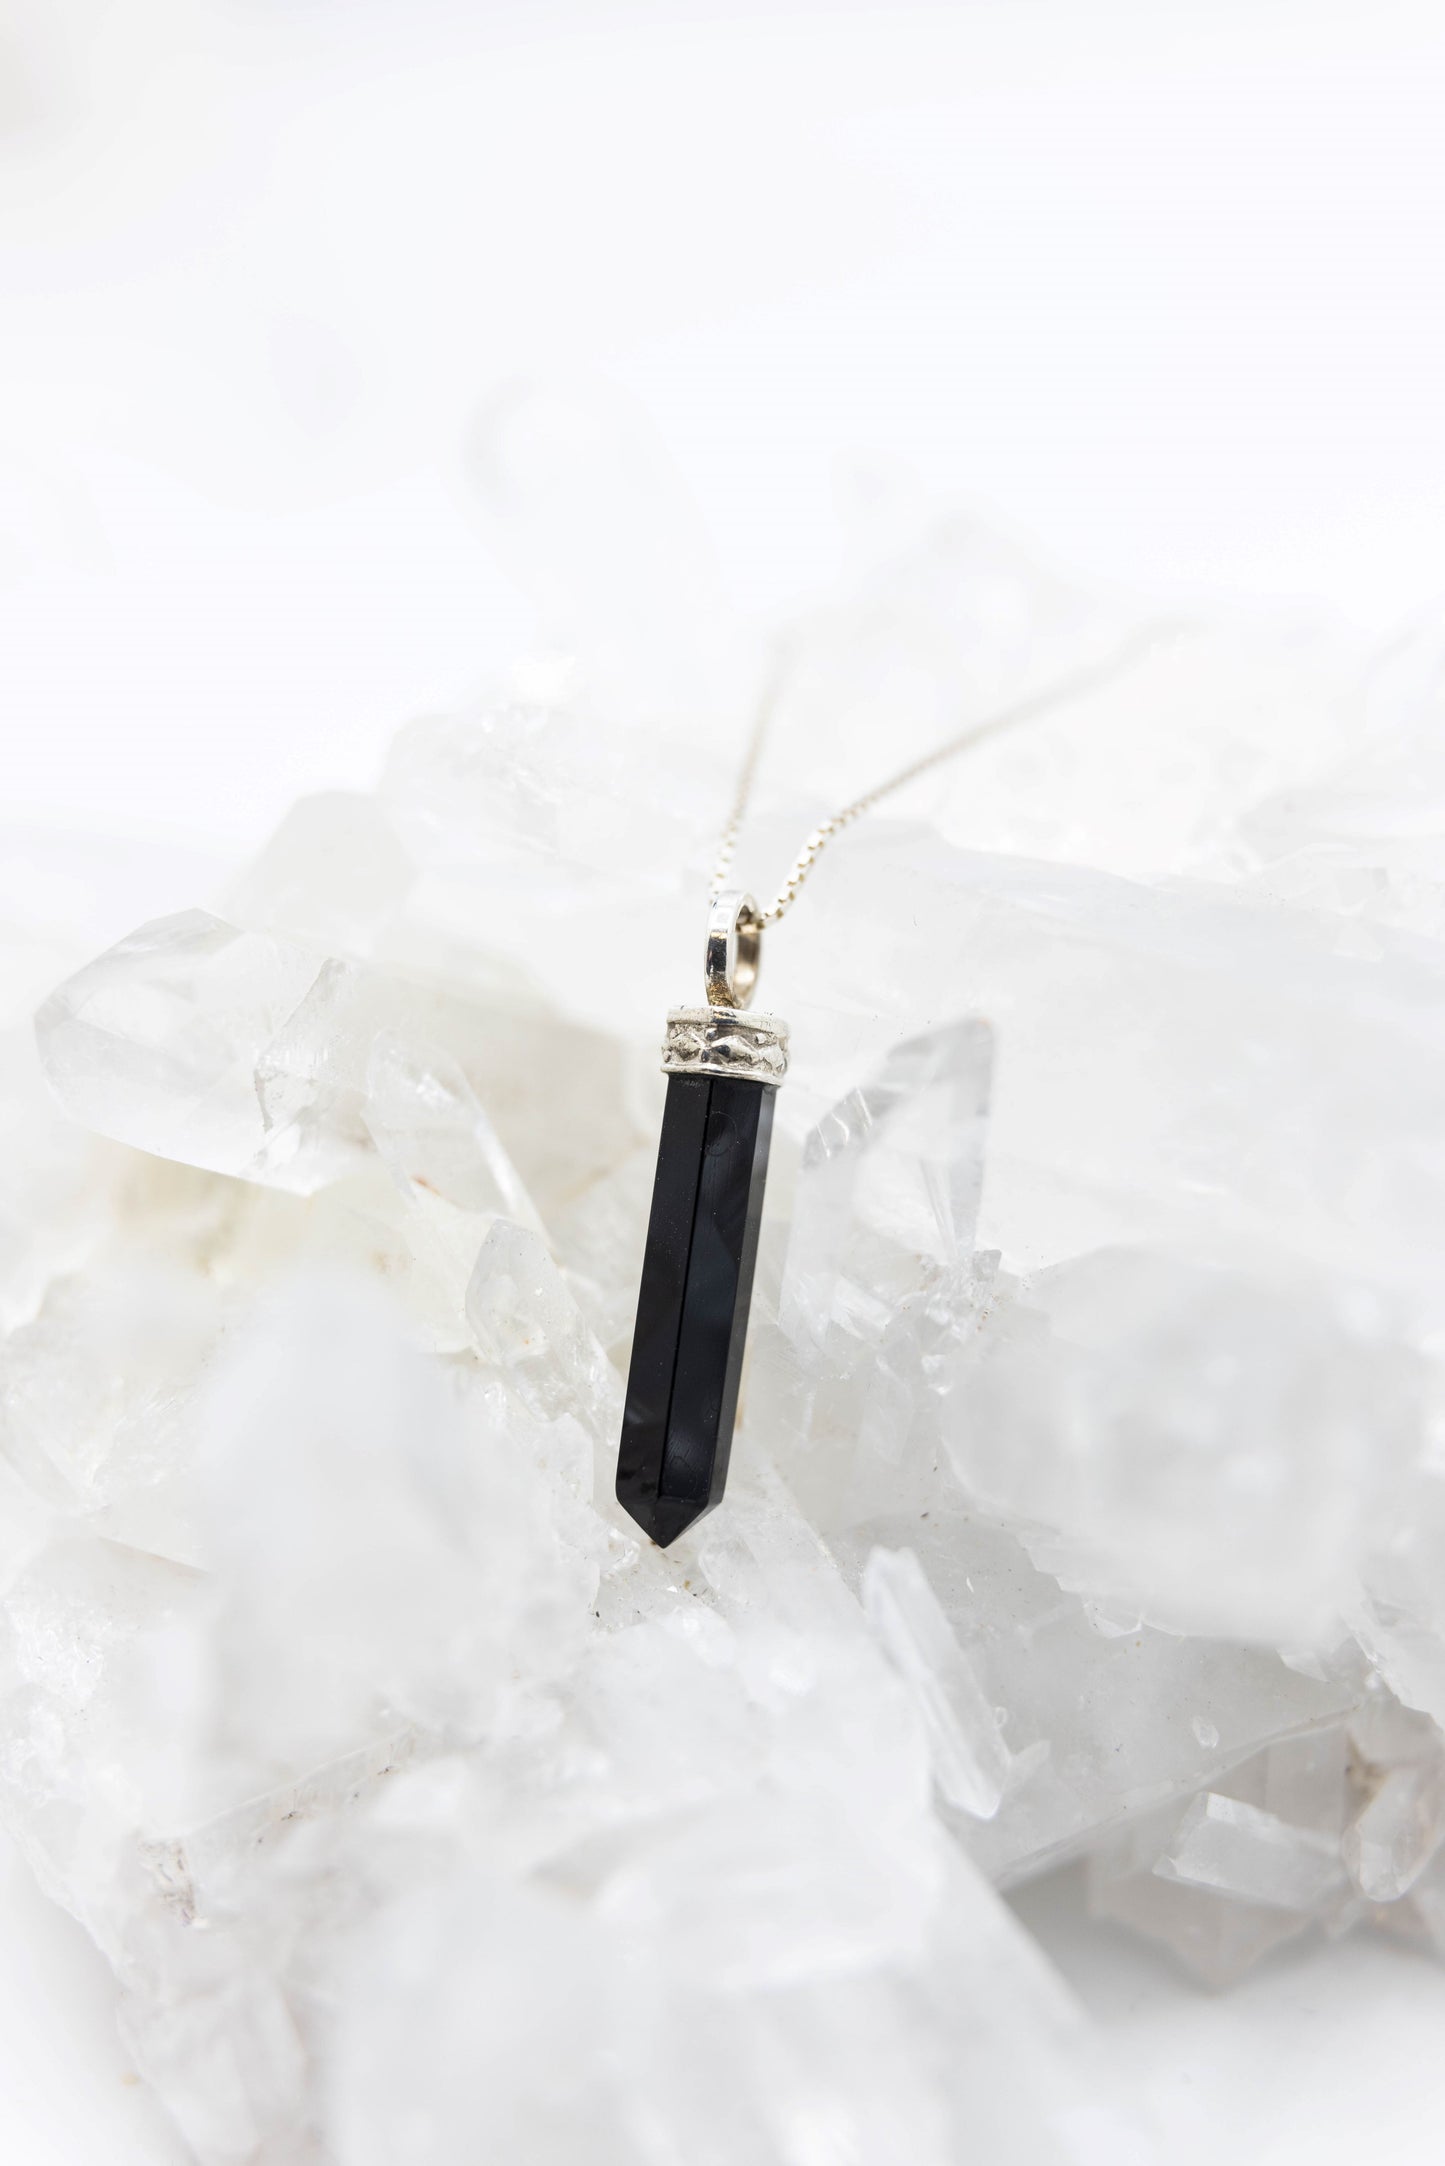 Obsidian Mini Crystal Point Necklaces .925 Adjustable Chain